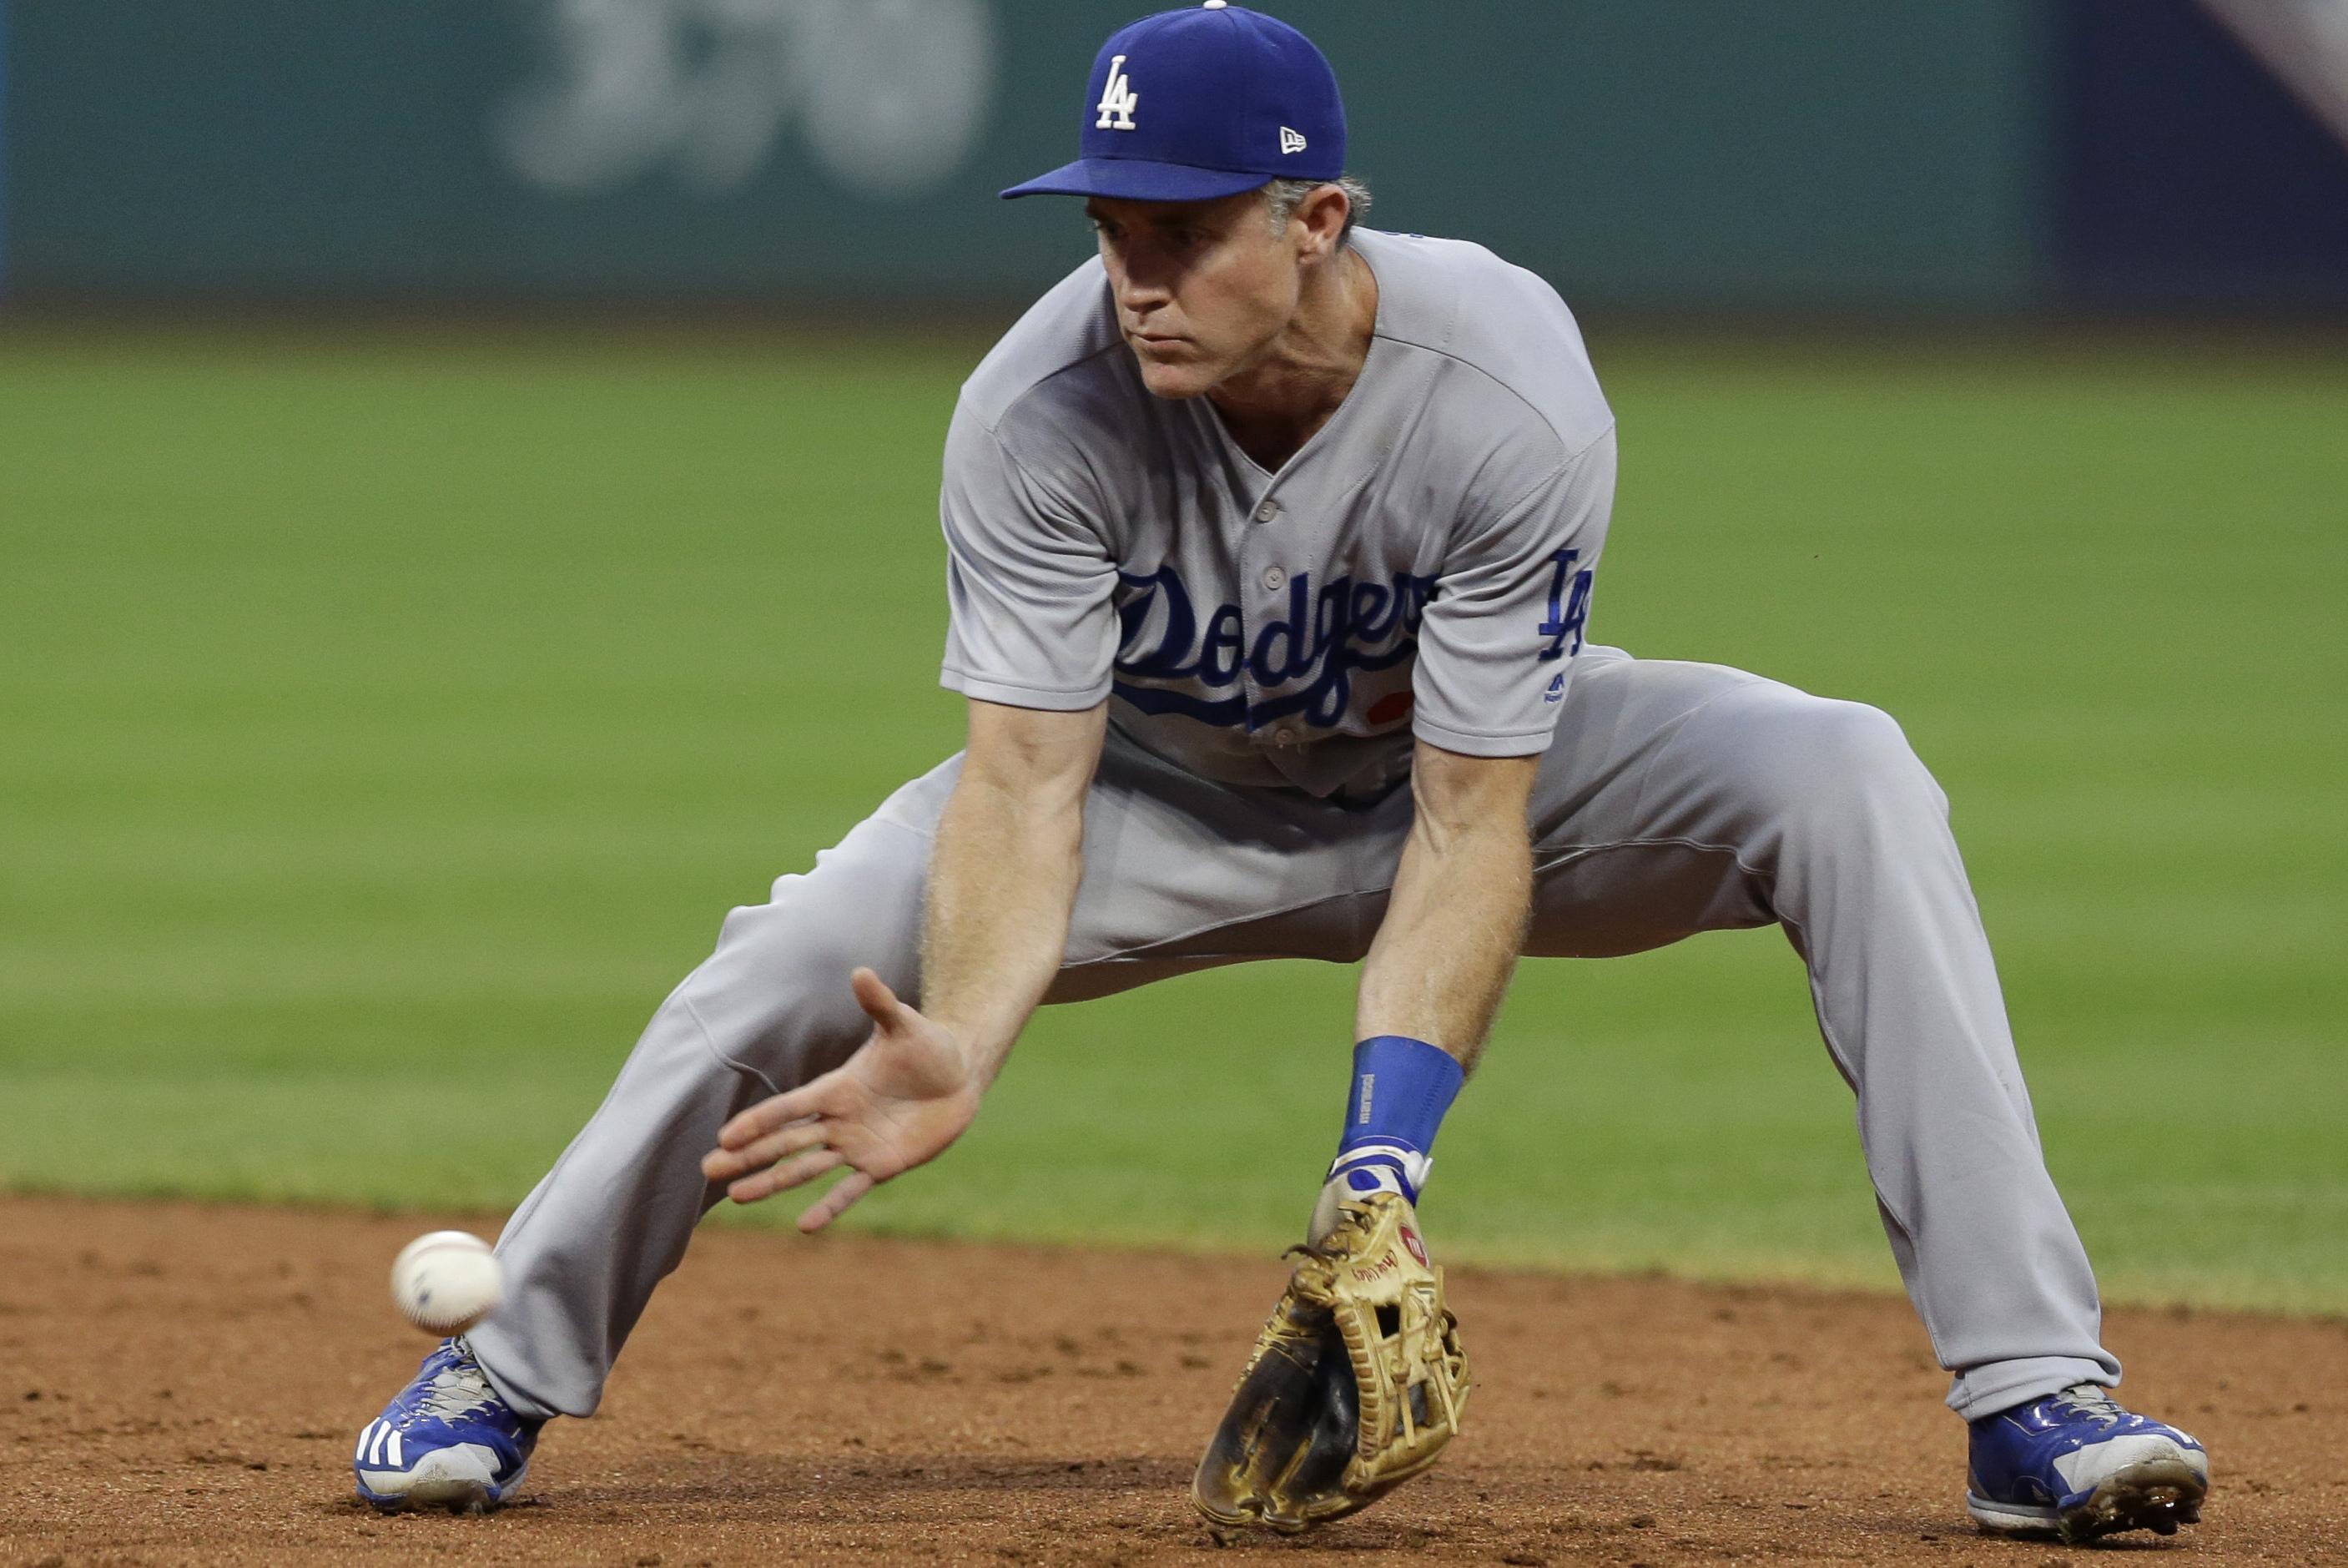 Chase Utley makes debut with Dodgers – Daily News